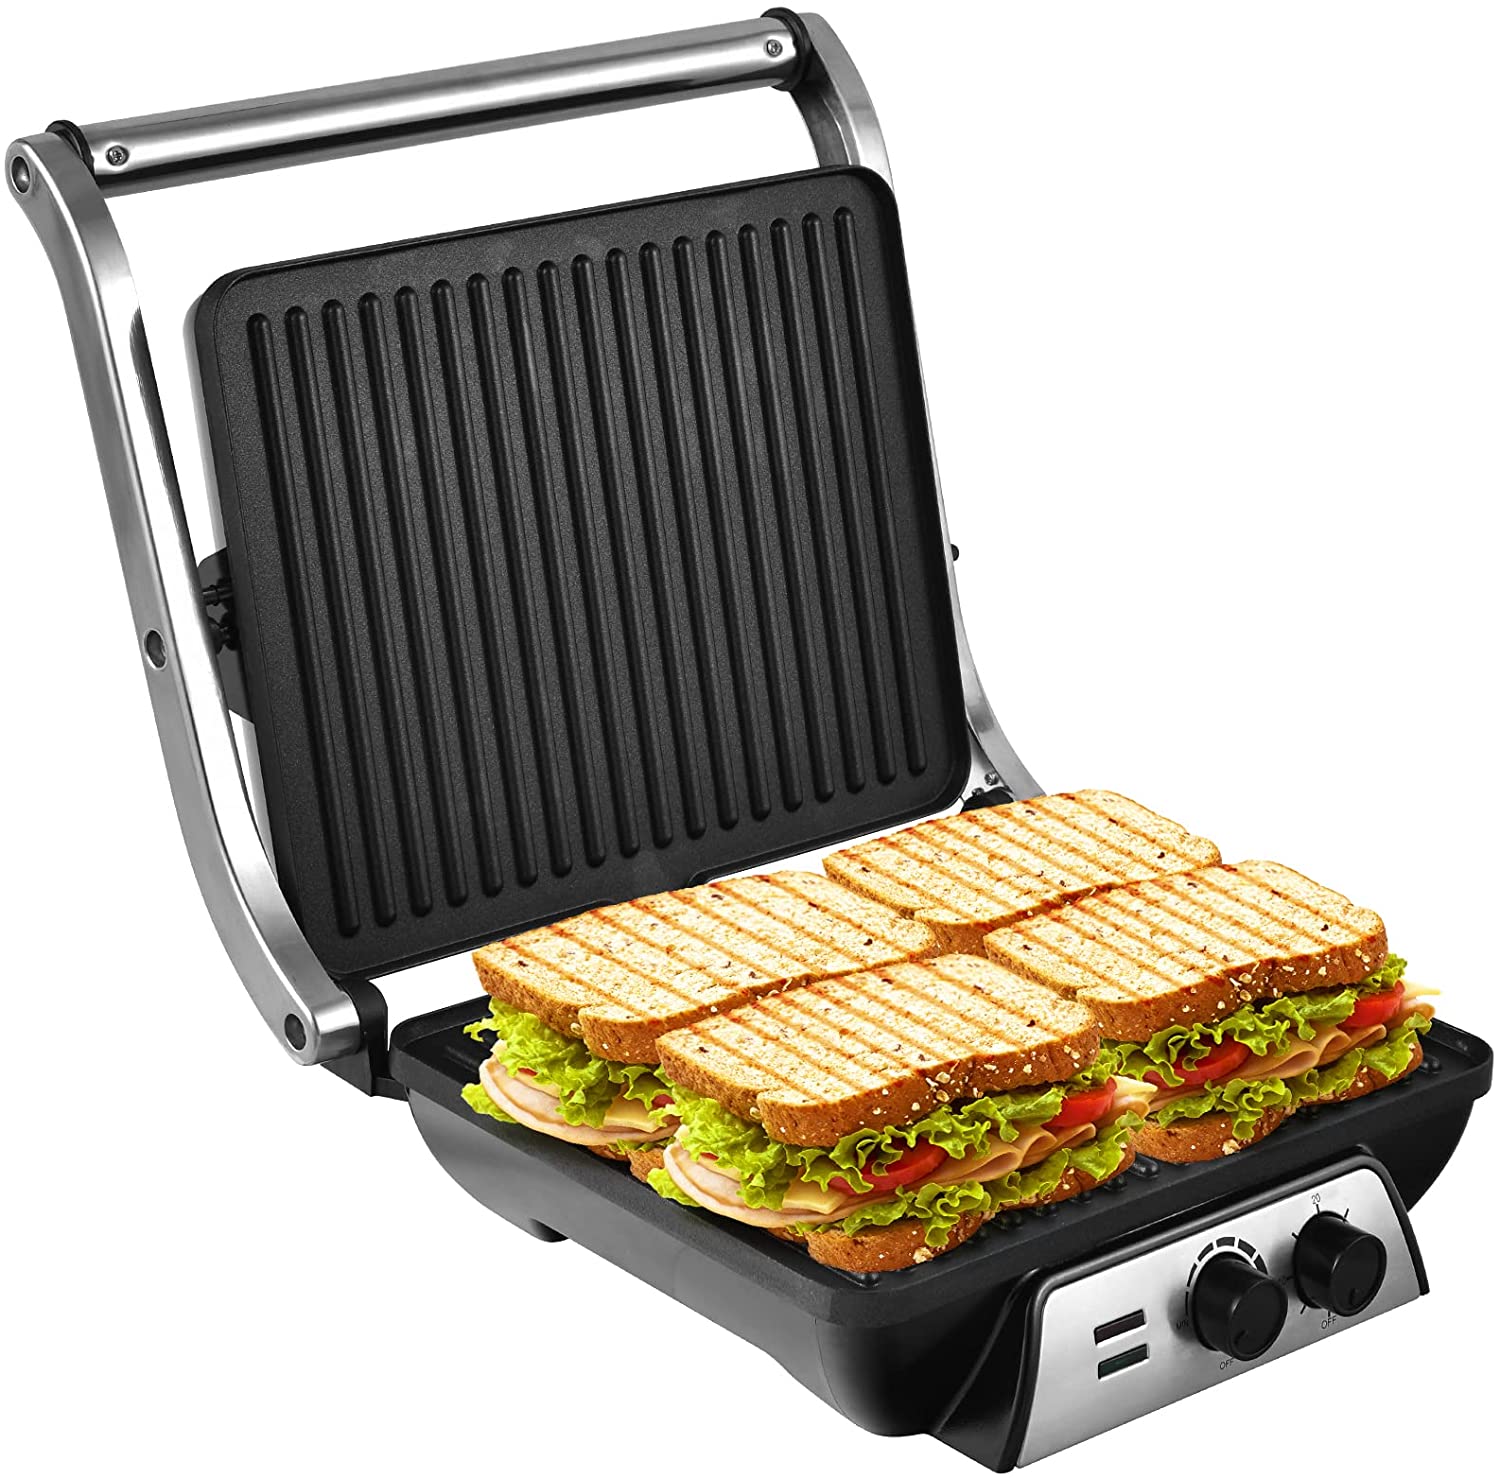 RELAX4LIFE 3-in-1 Sandwich Maker & Contact Grill & Panini Maker, 2000 W Sandwich Toaster with Non-Stick Coated Plates, Stainless Steel Sandwich Maker, Electric Grill with 30 Minute Timer & Temperature Control